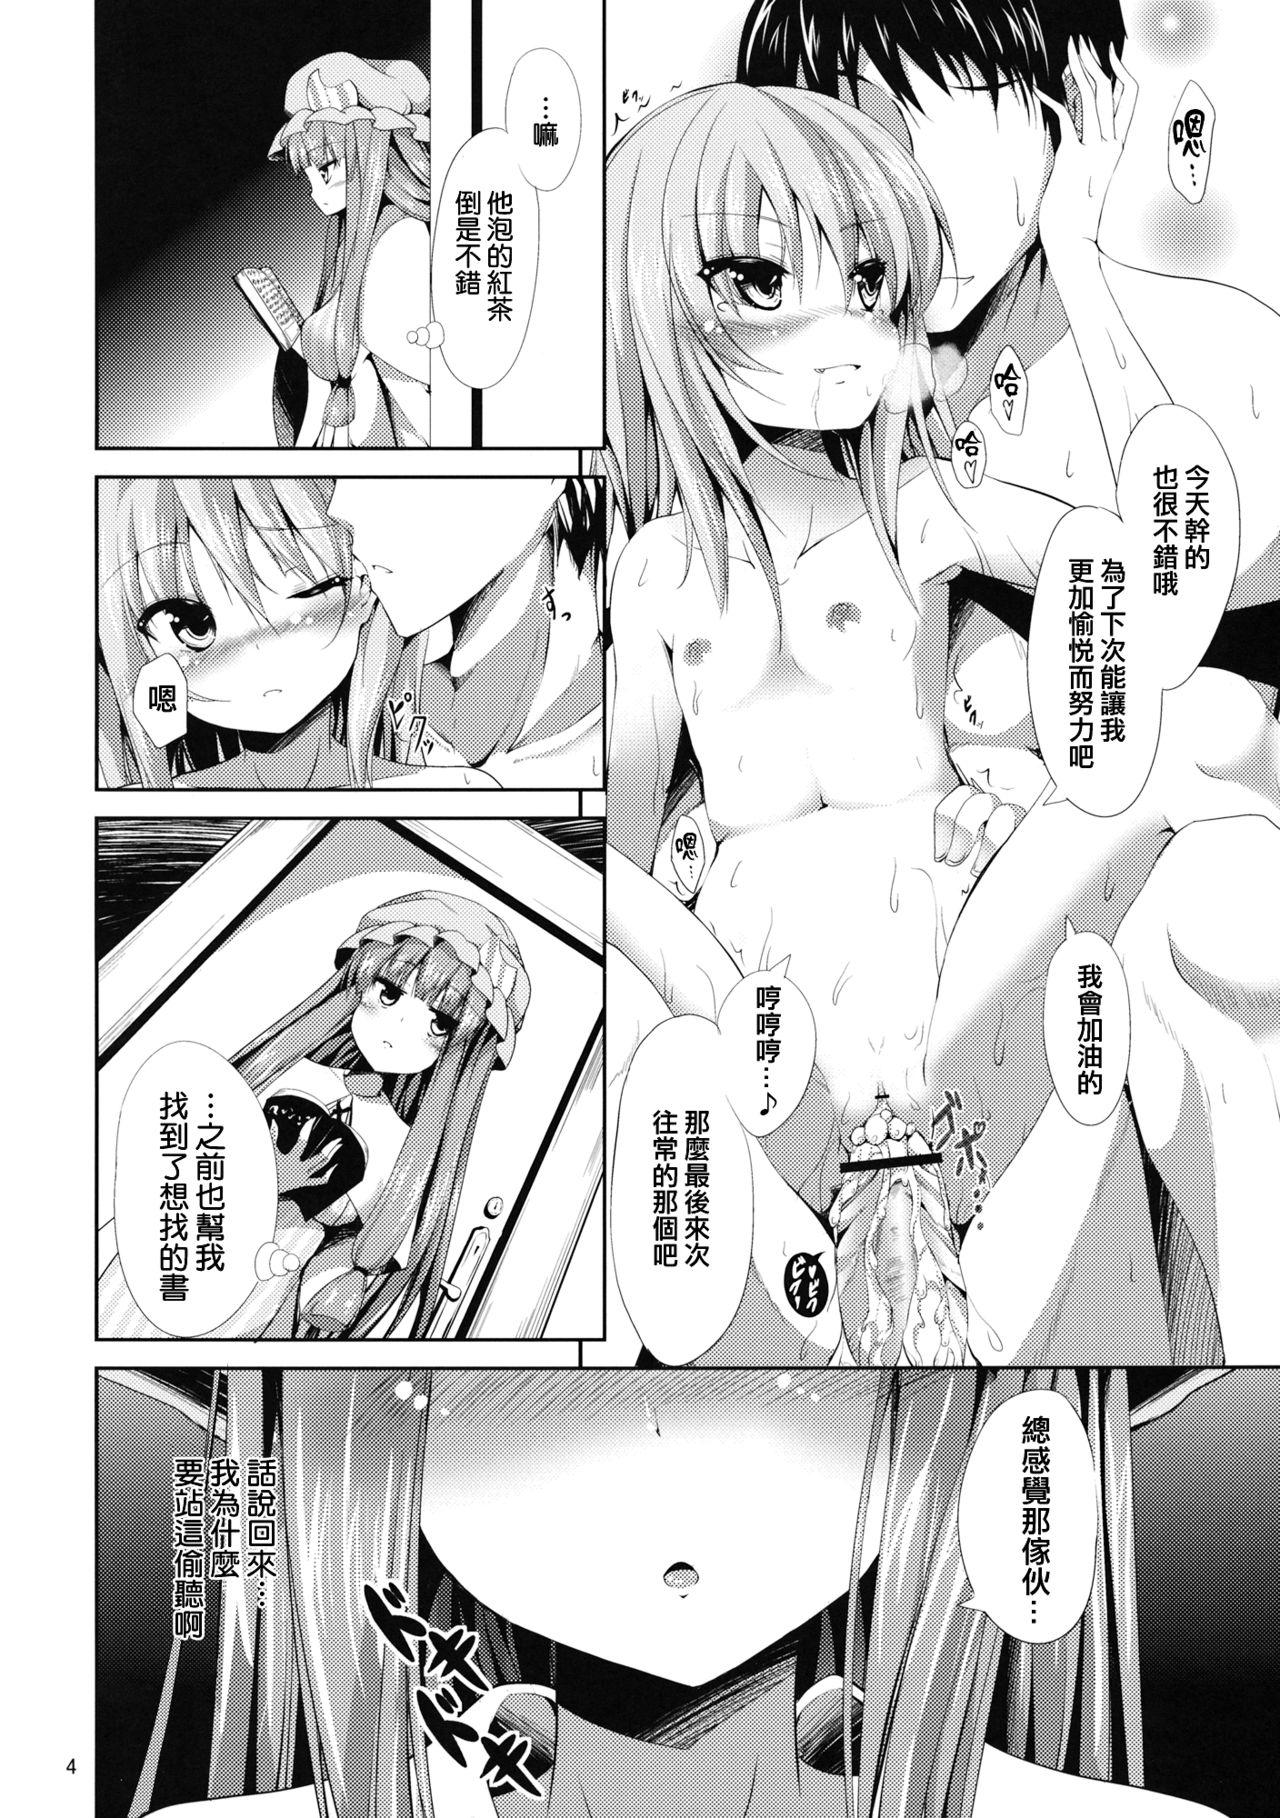 Perfect Teen Sweet nothingS - Touhou project Sapphic - Page 4